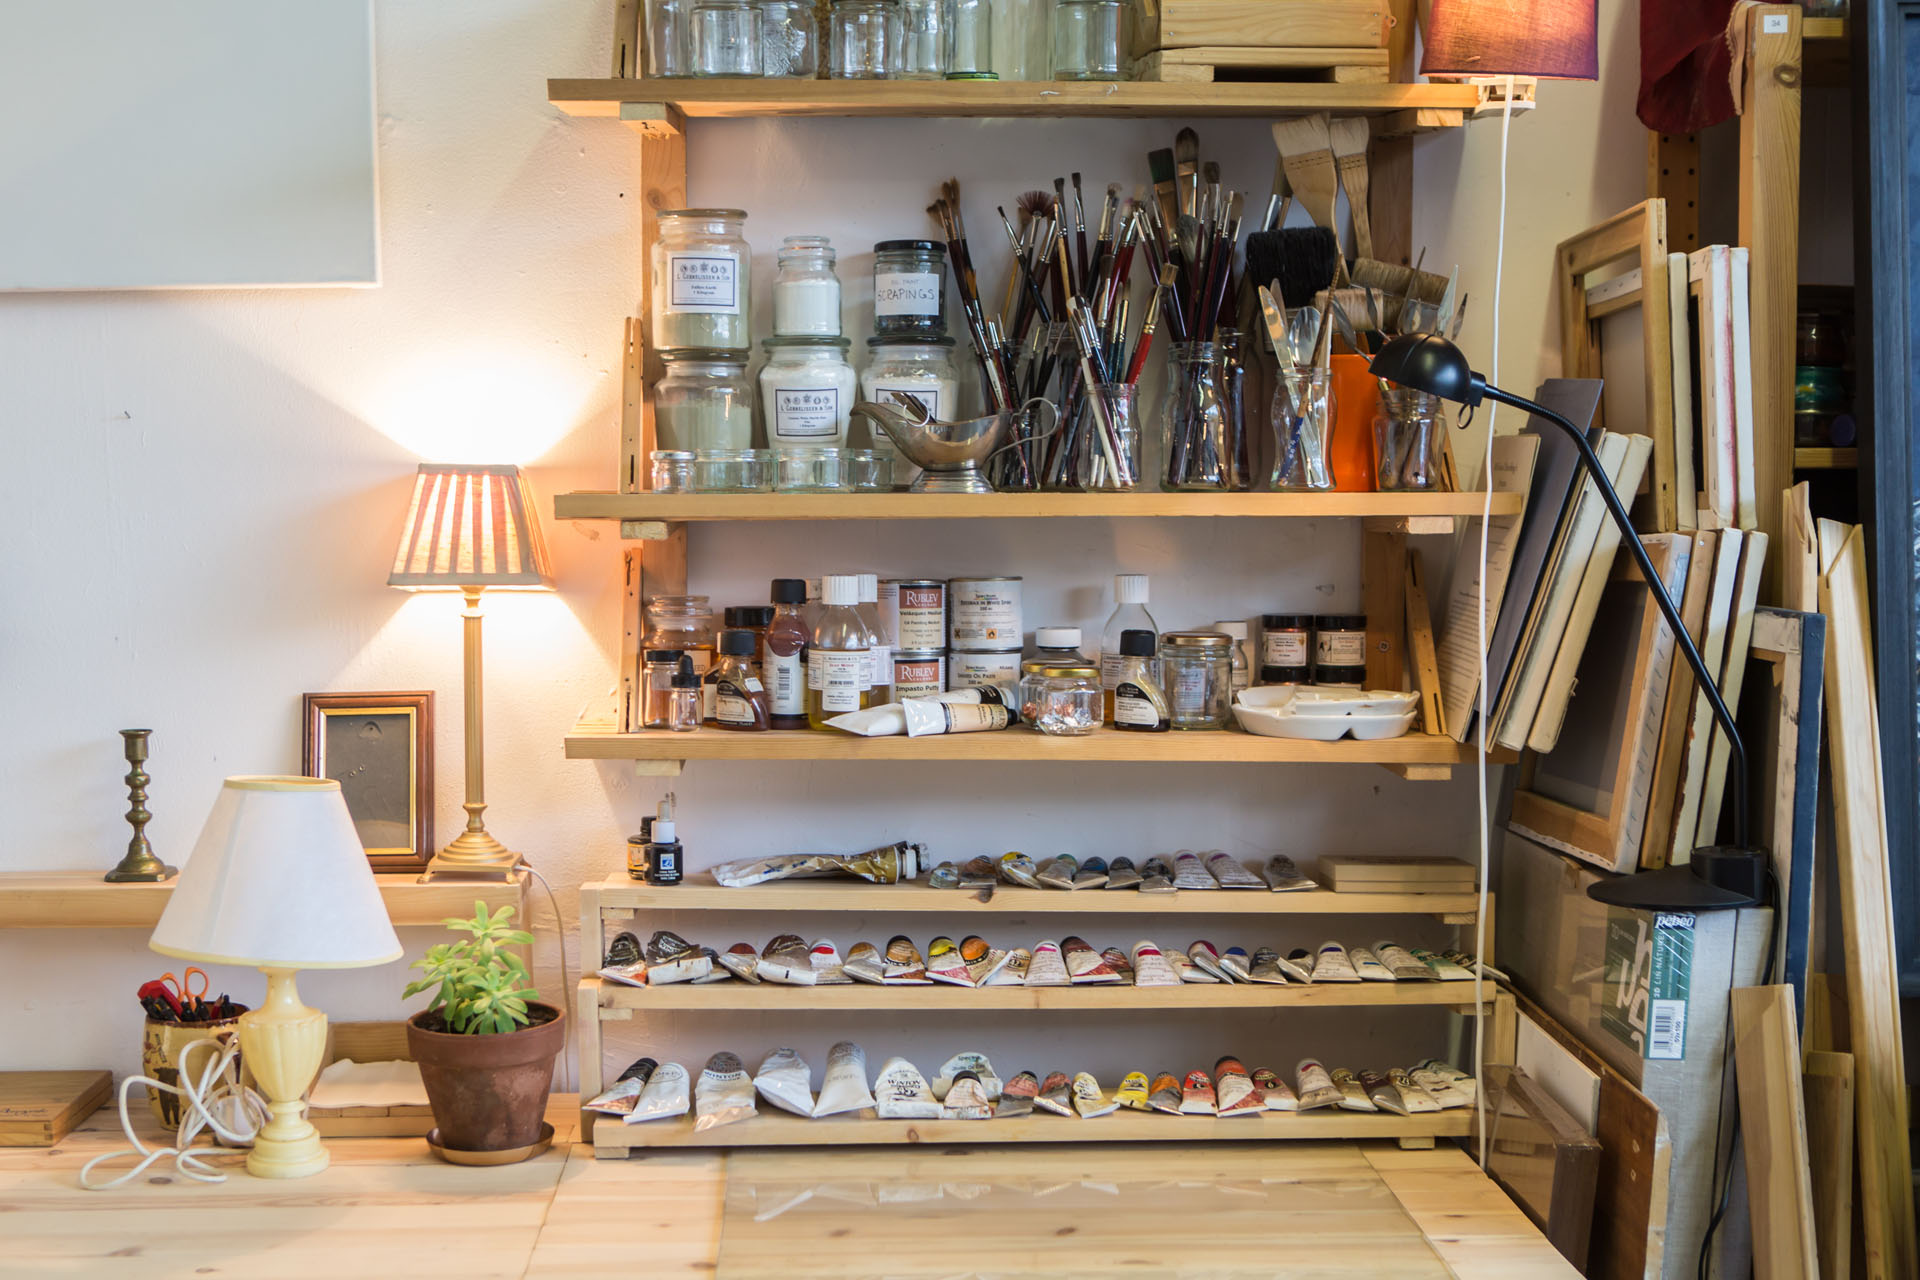 A desk with shelves holding paint and other artist tools